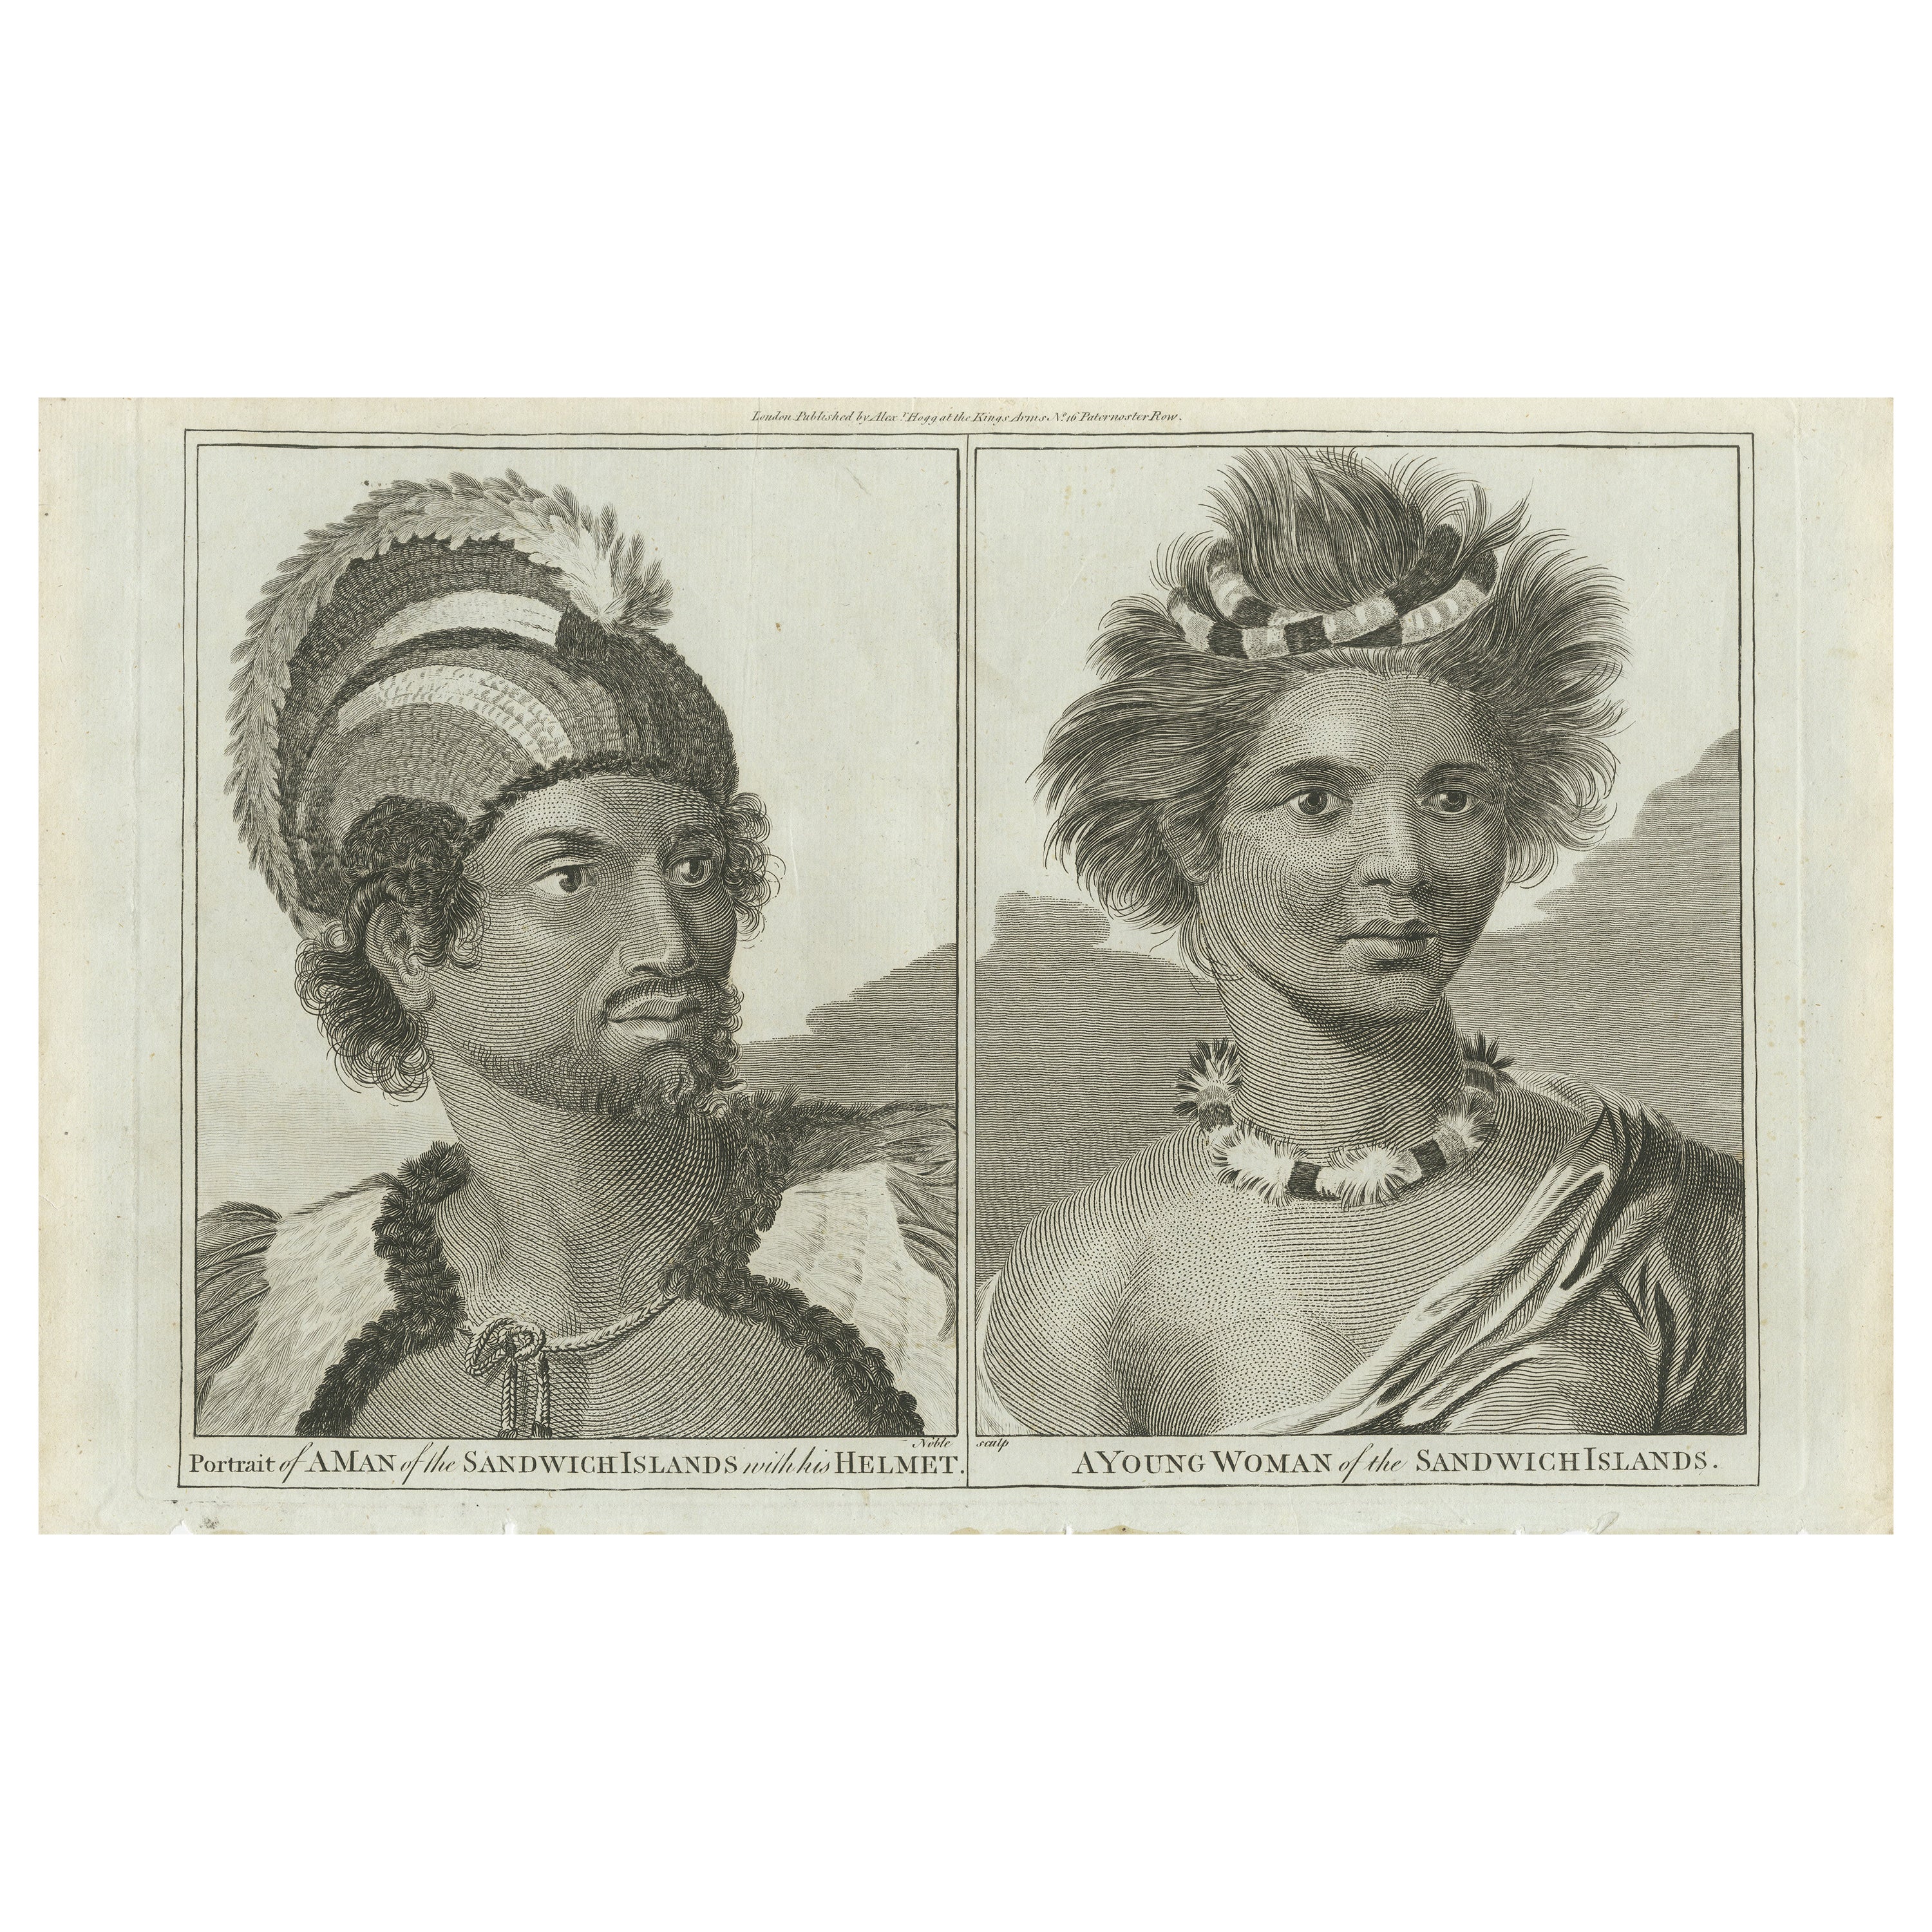 Regalia of the Sandwich Islands: Portraits in traditioneller Kleidung, 1790